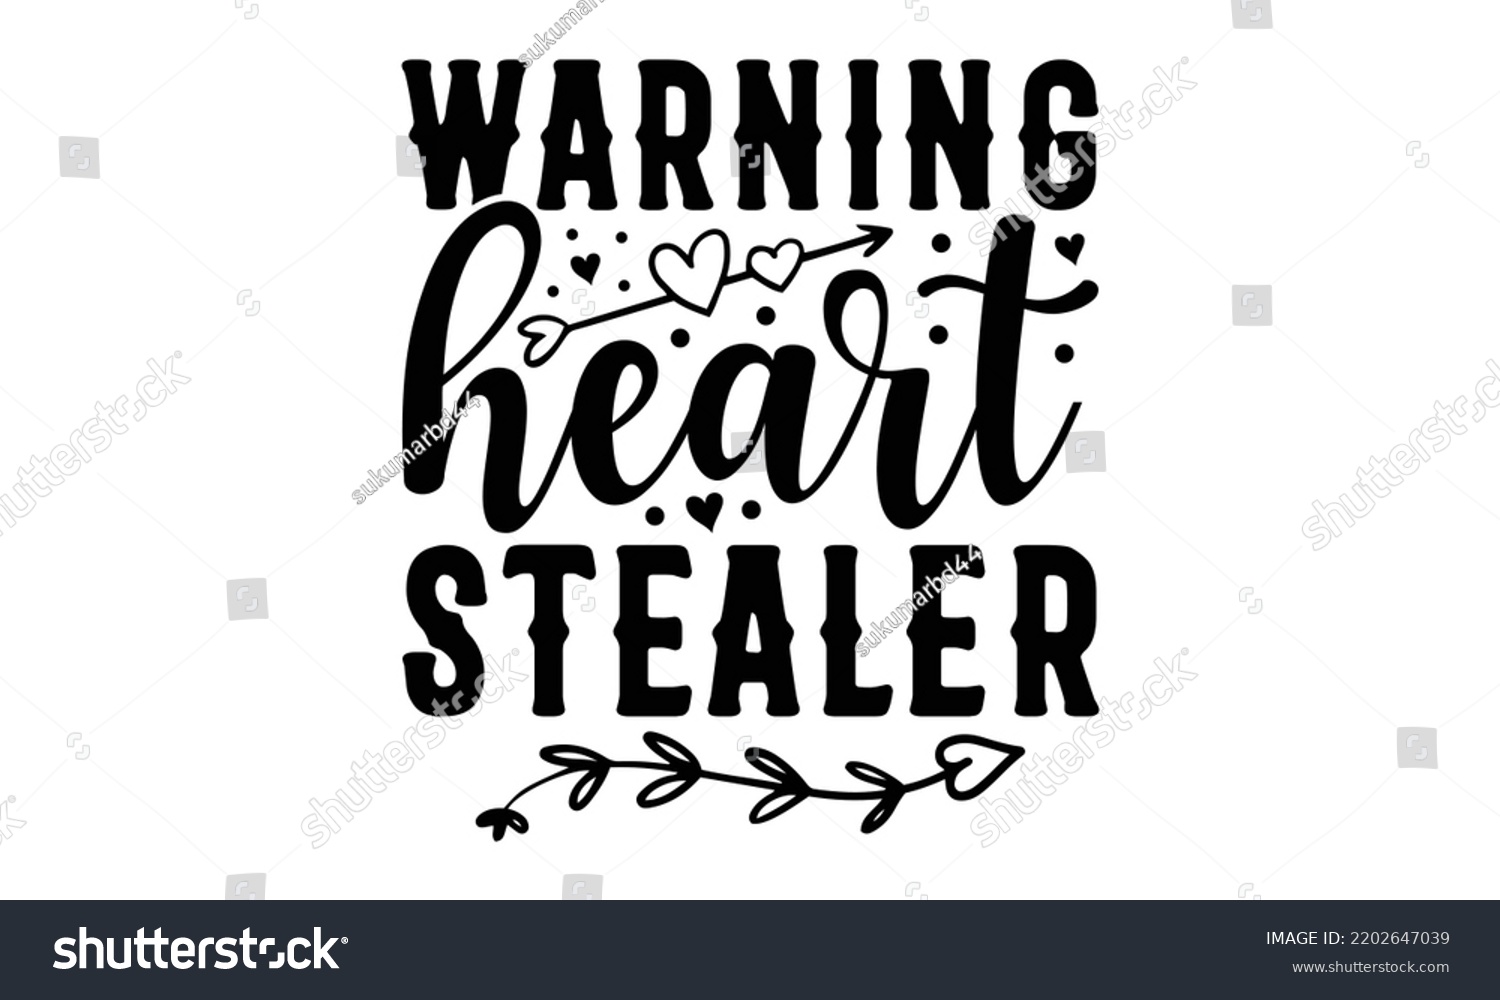 SVG of Warning Heart Stealer - Valentine's Day t shirt design, Hand drawn lettering phrase isolated on white background, Valentine's Day 2023 quotes svg design. svg